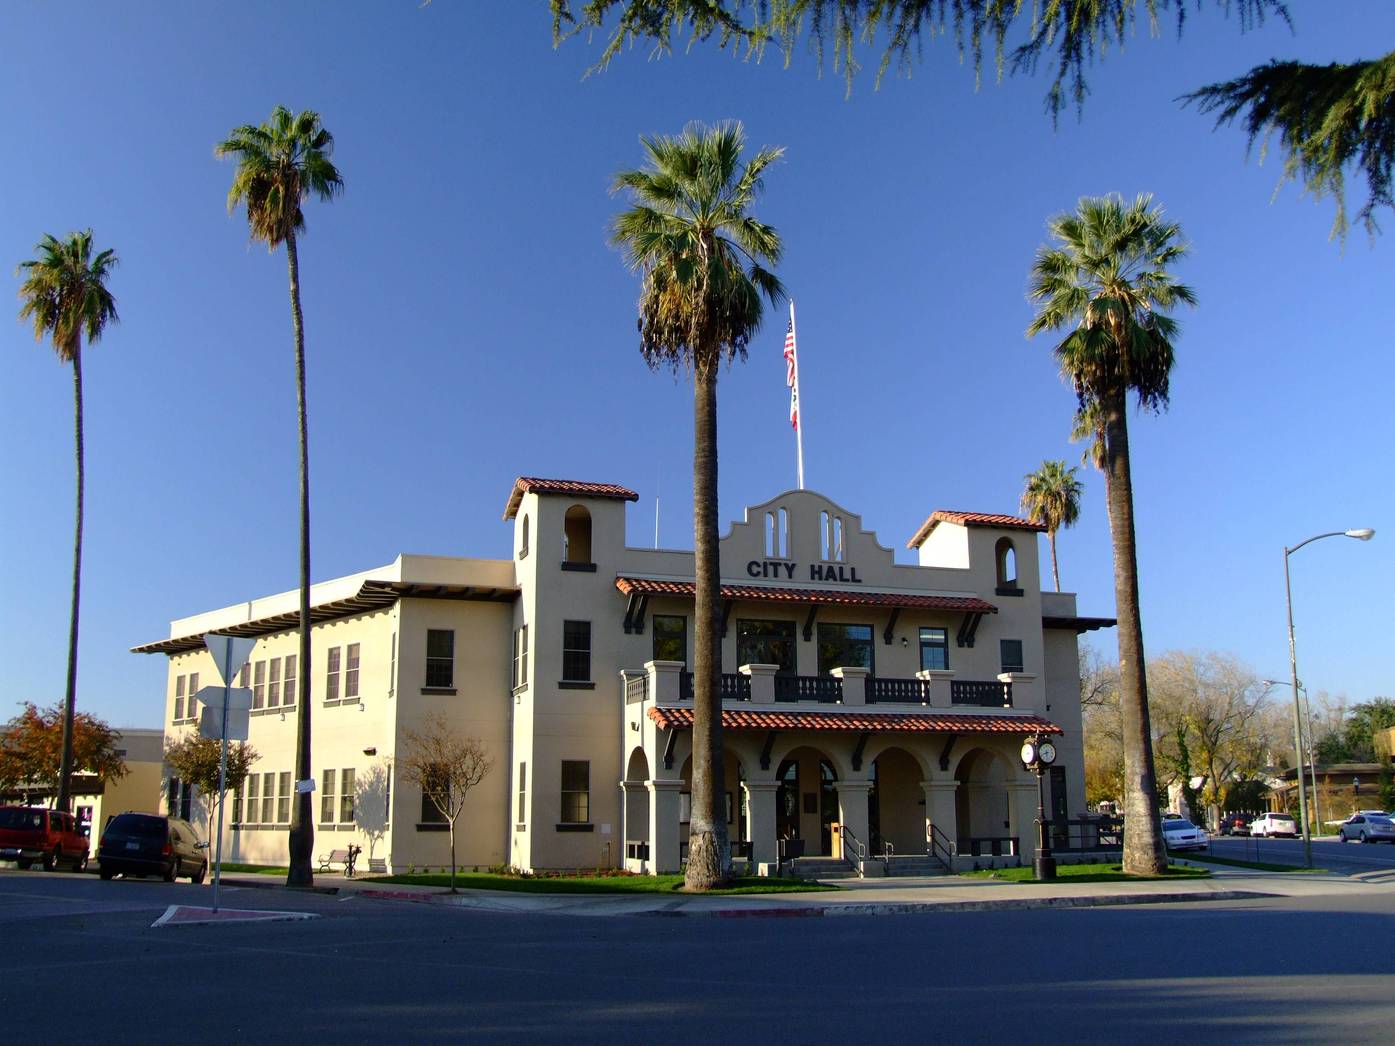 Patterson, CA: Patterson City Hall - Former site of Del Puerto Hotel after which City Hall was modeled